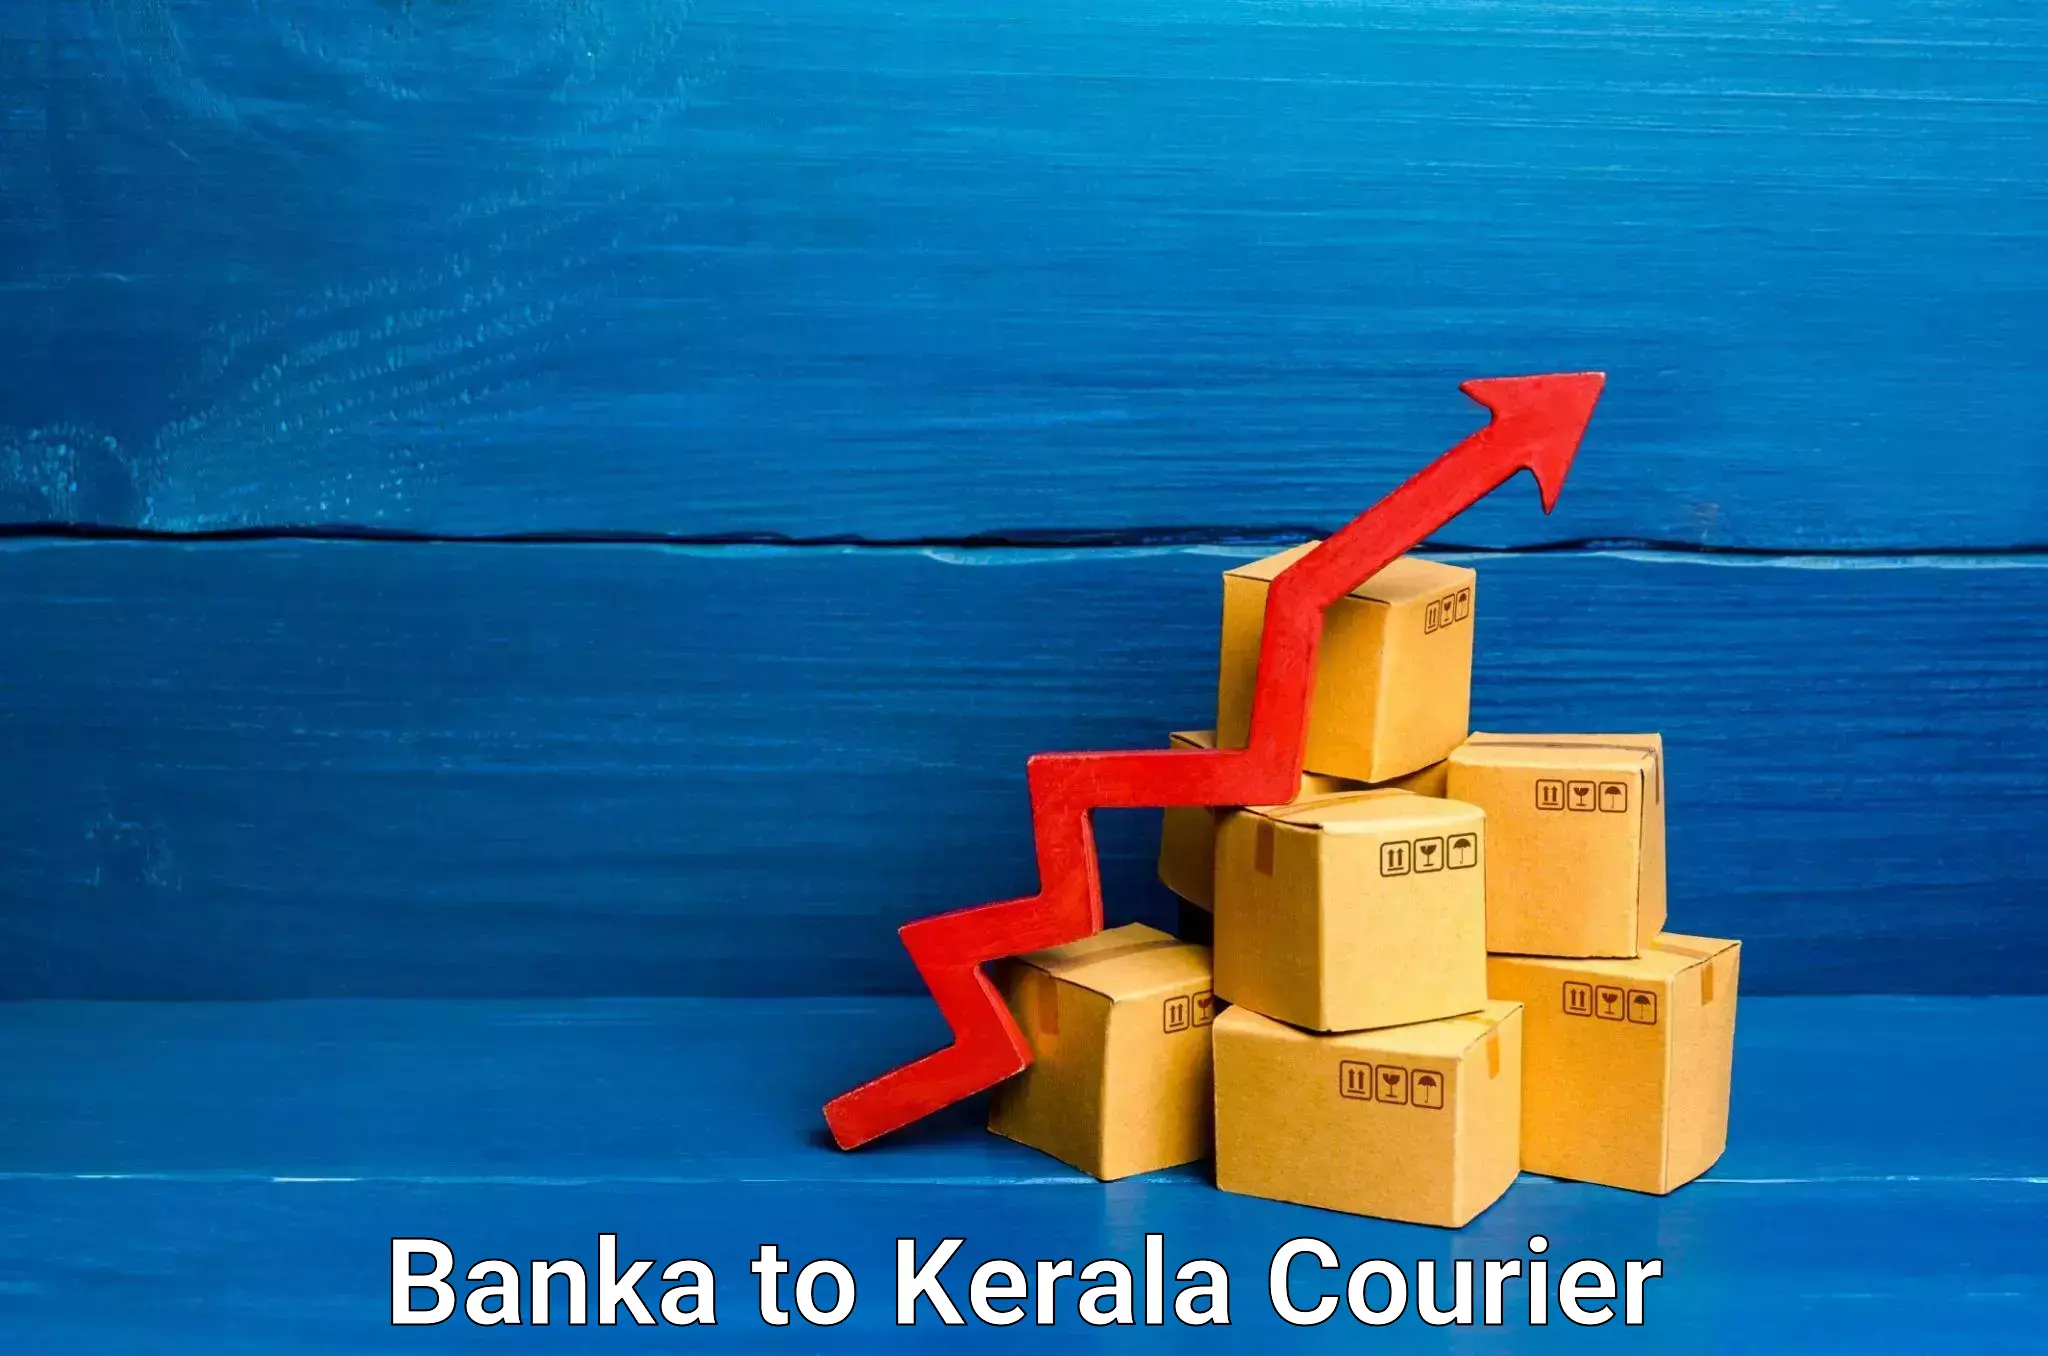 Personalized relocation plans in Banka to Kochi